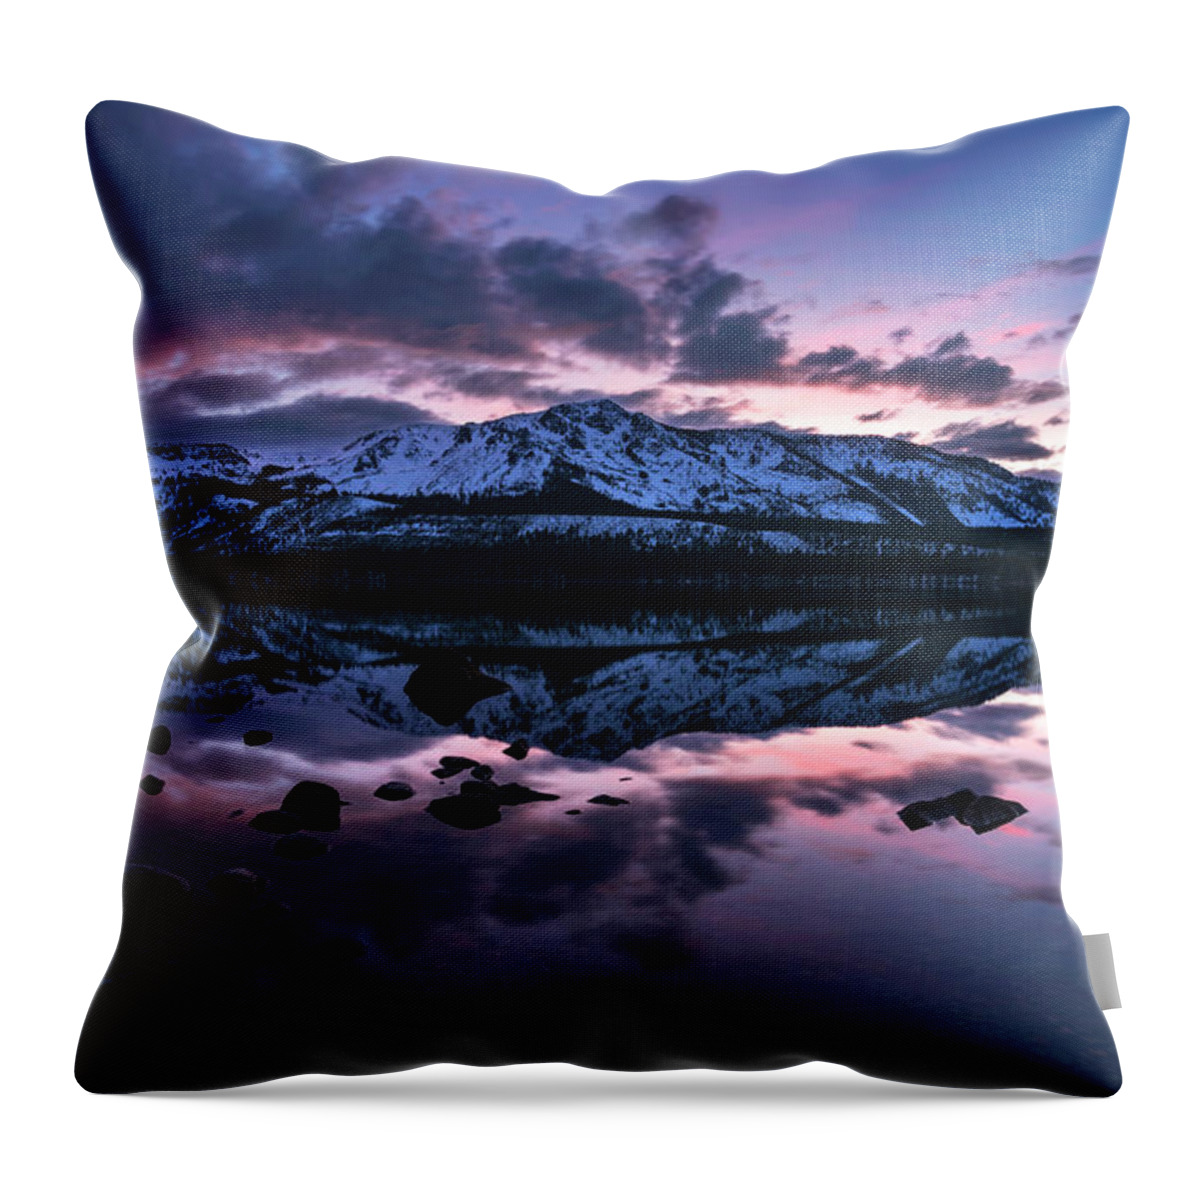 Fallen Leaf Lake Throw Pillow featuring the photograph Rose Reflections by Brad Scott by Brad Scott